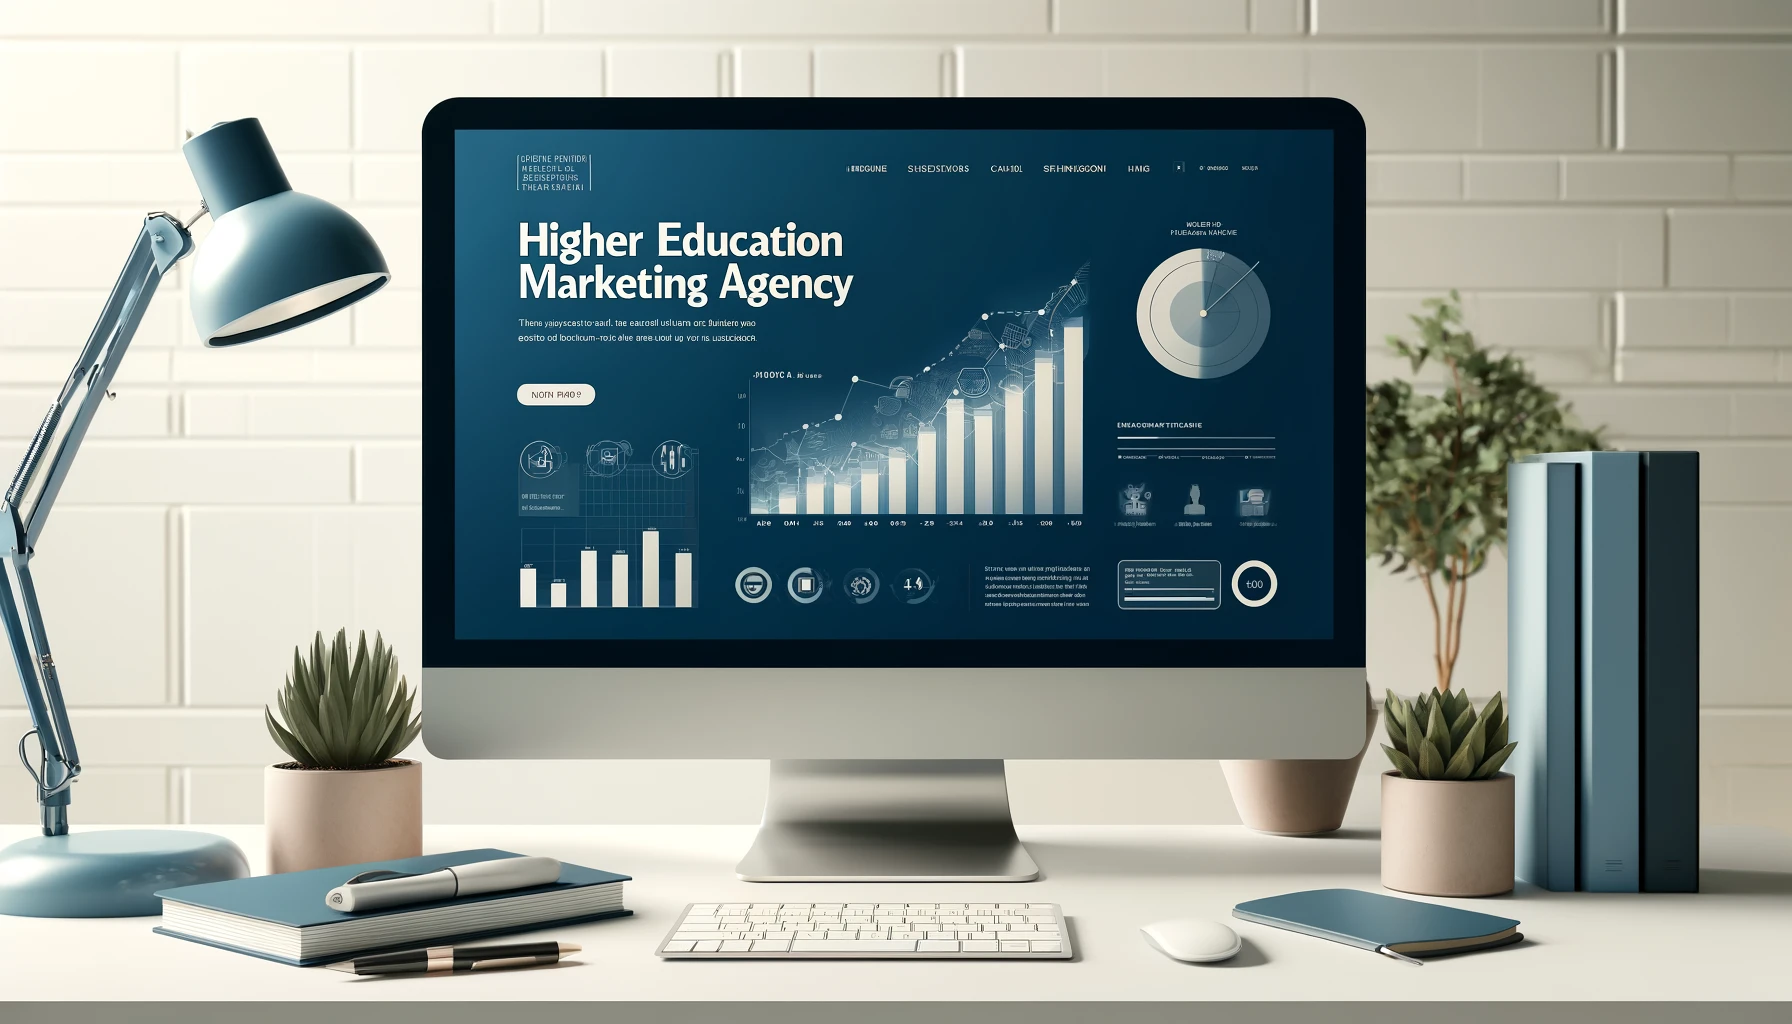 A widescreen image of a professional looking website on education, styled like a modern web page. The header crisply states 'Higher Education Marketing Agency'. The design includes elements like bar graphs, line charts, and pie charts to display data attractively. These graphical elements should be integrated seamlessly into the layout, demonstrating statistics or outcomes of marketing efforts. The main color theme of the website should include shades of blue and white, giving it a clean, academic, and professional appearance.